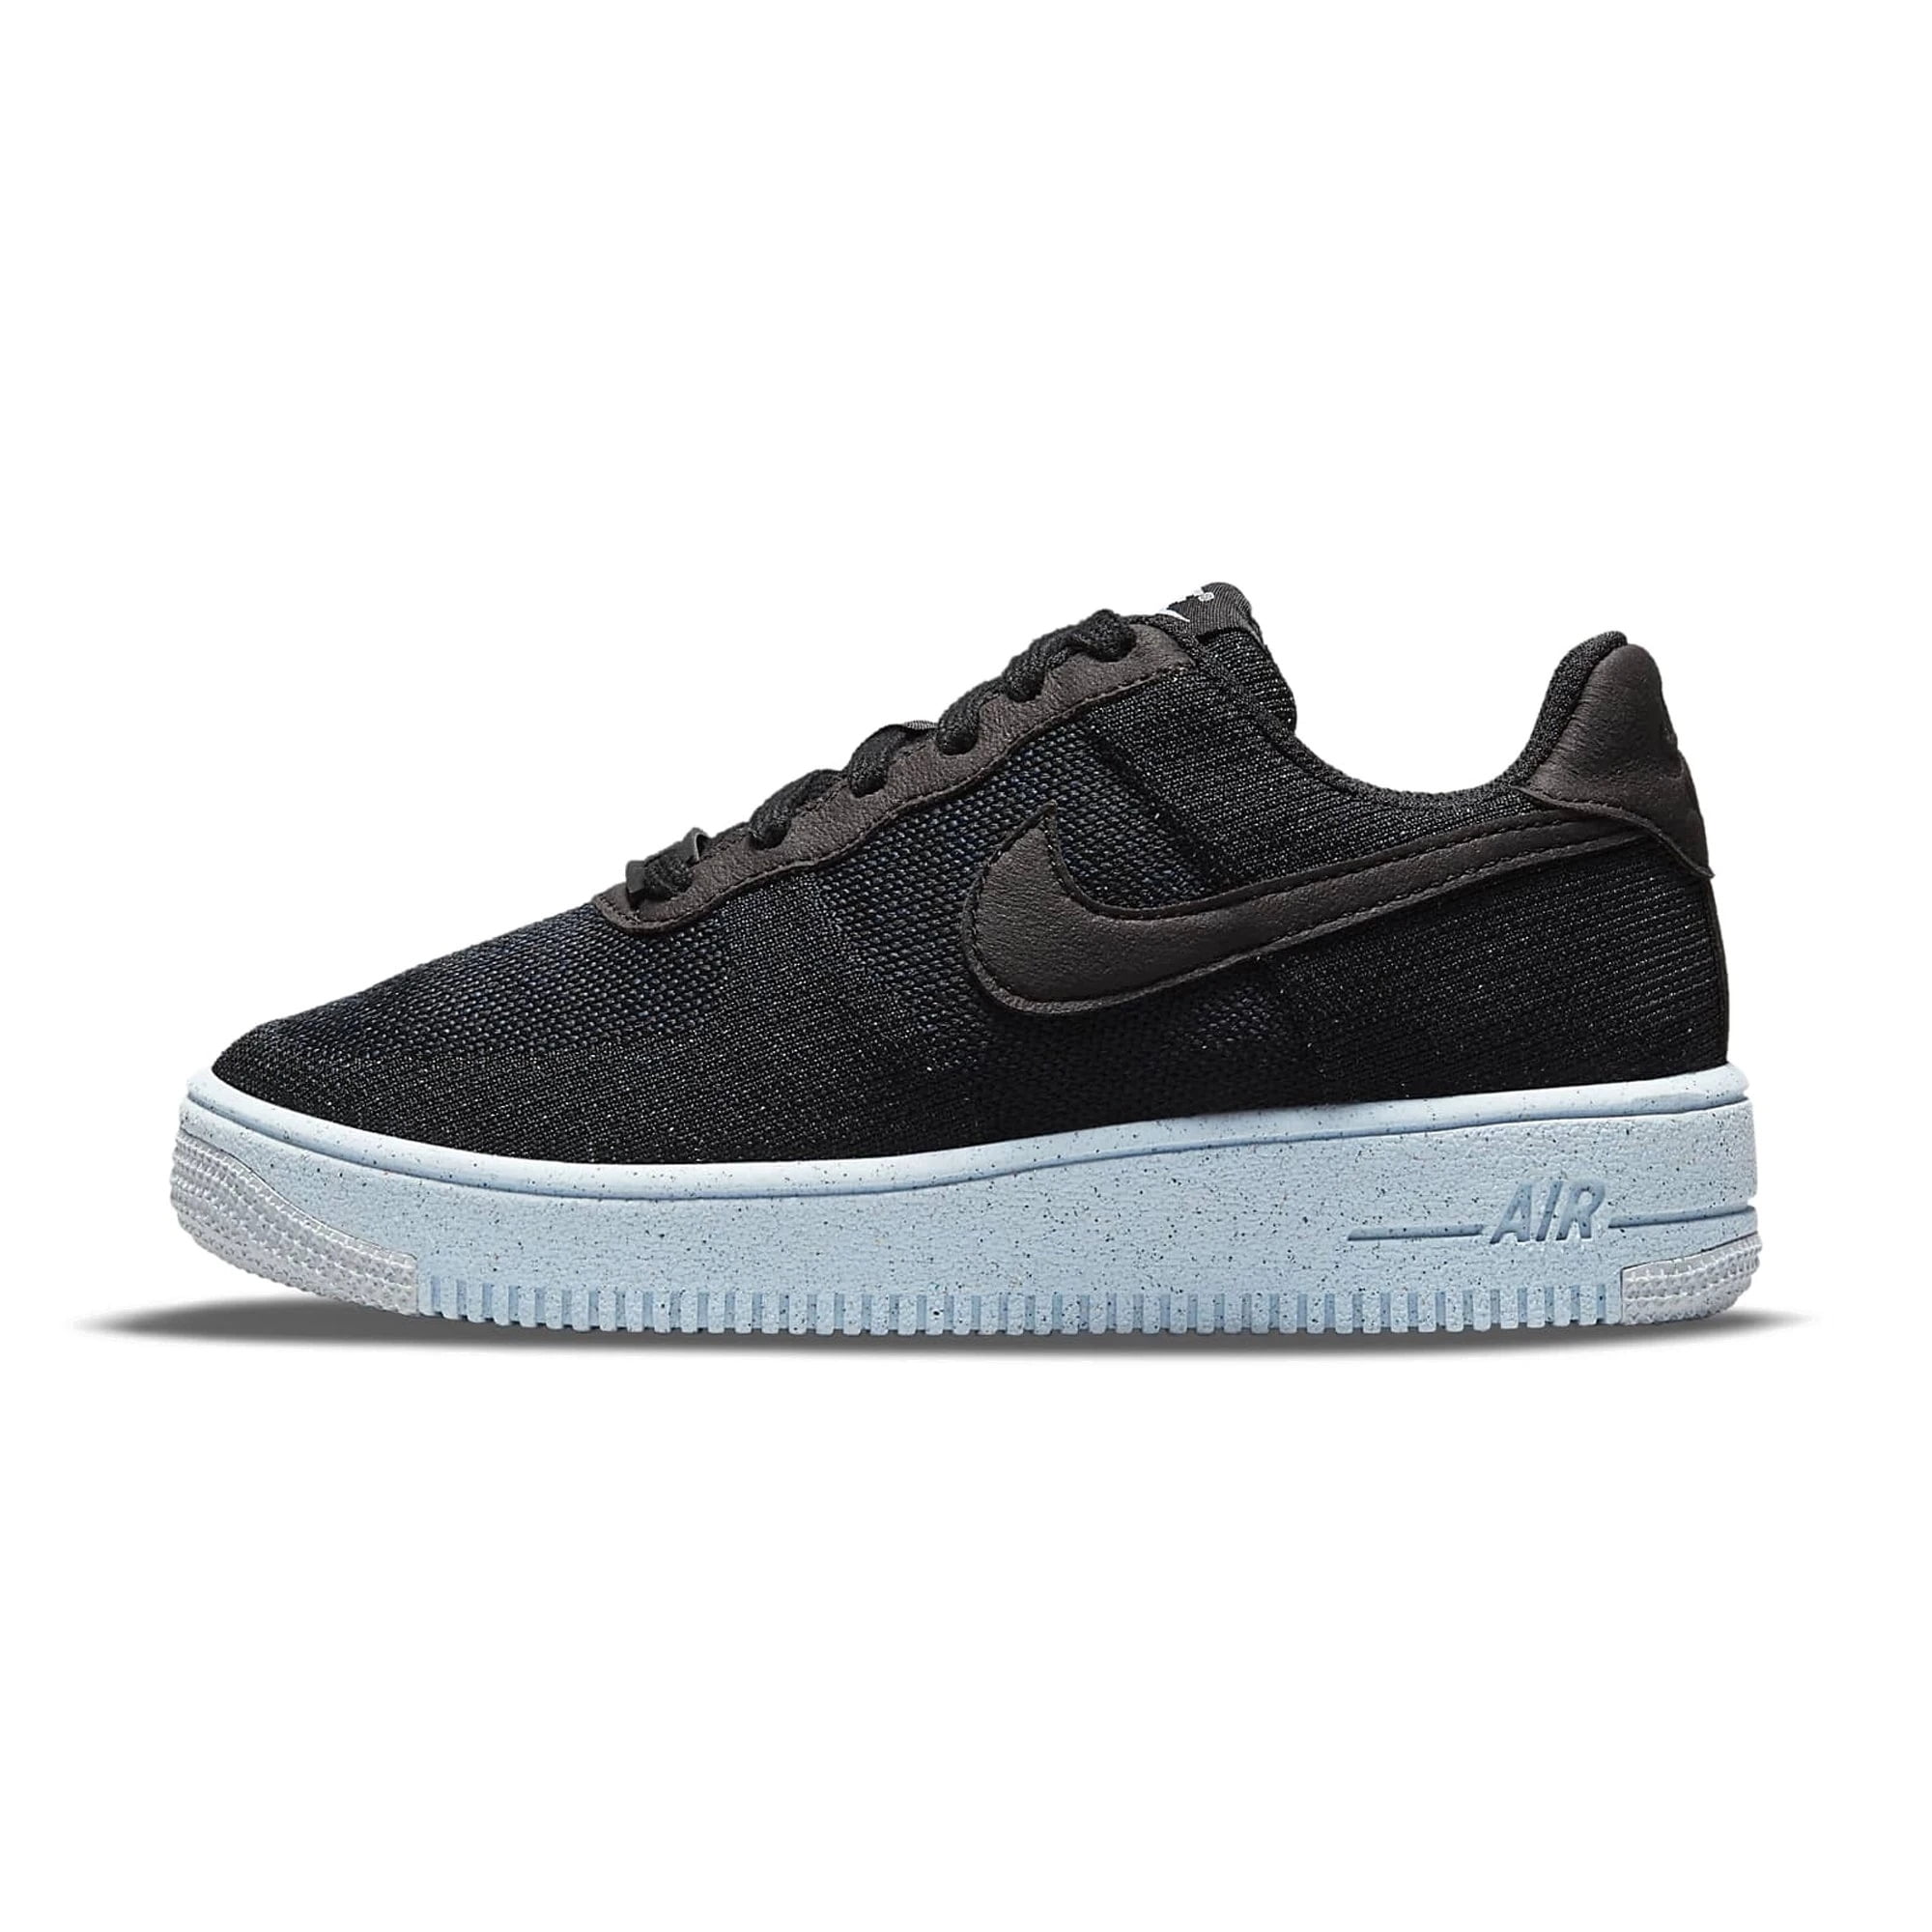 zwavel Wanorde impliceren Nike Air Force 1 Crater Flyknit (GS) Big Kids' Shoes Black-Chambray Blue  dh3375-001 - Walmart.com